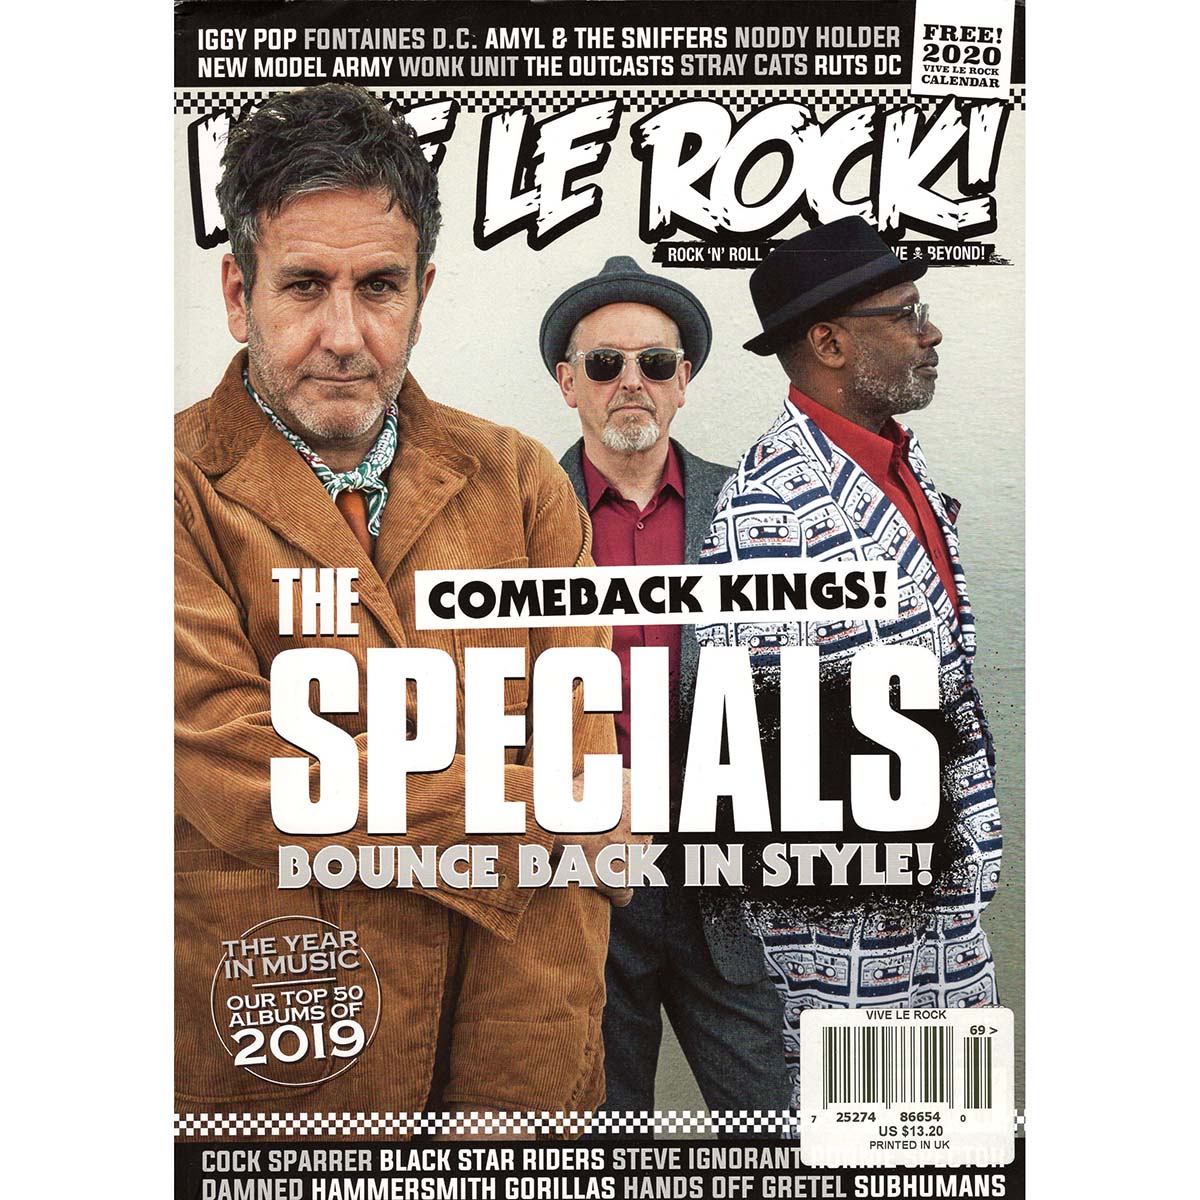 Vive Le Rock! Issue 69 (January 2020) - The Specials